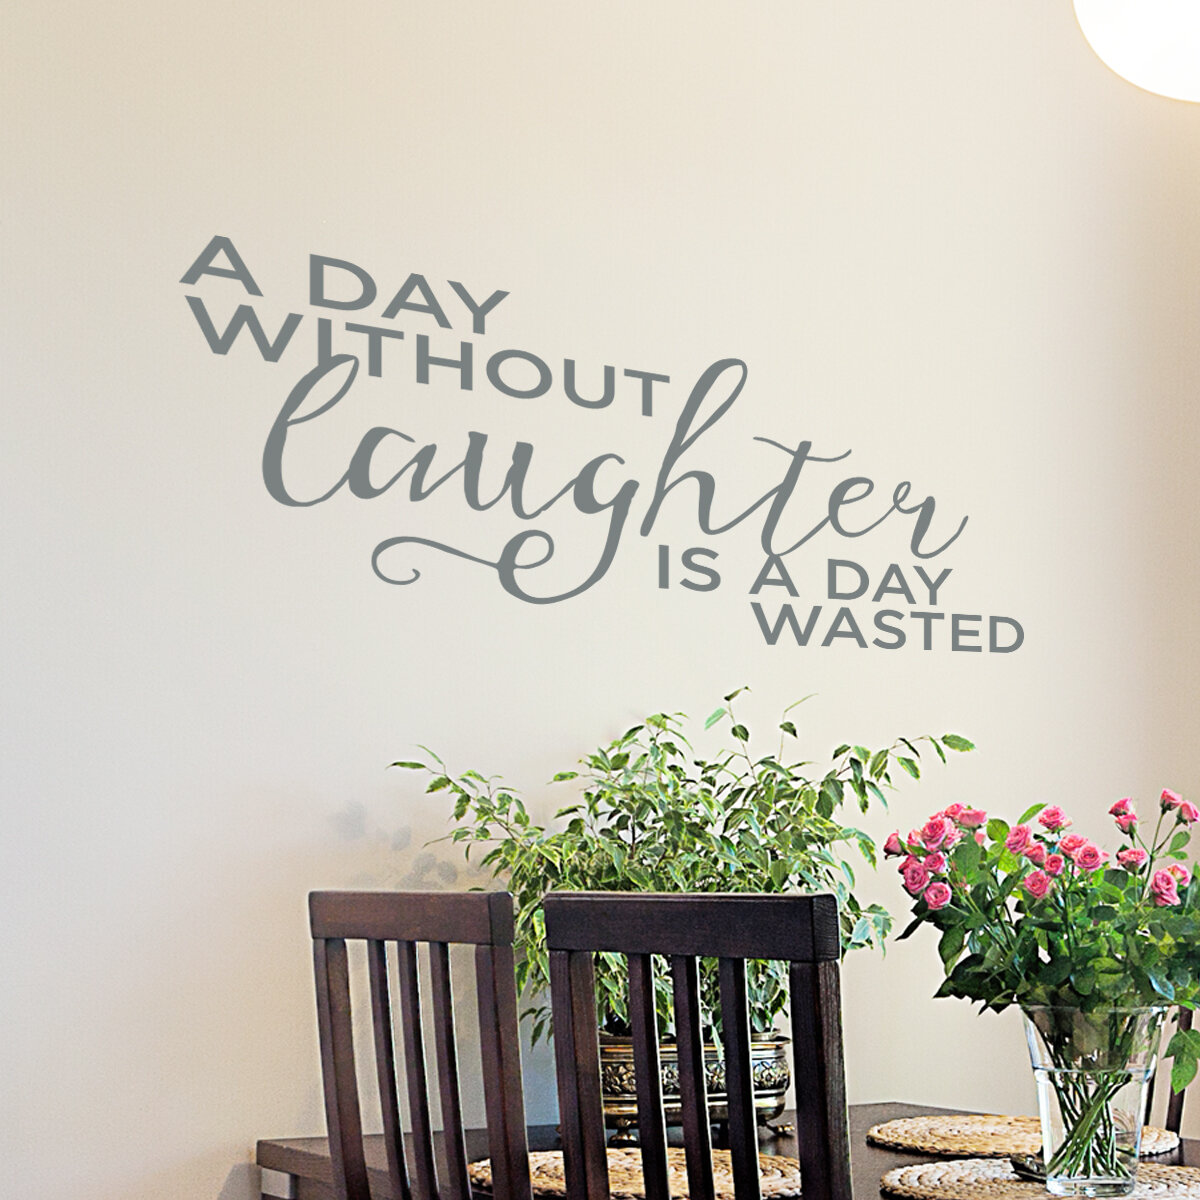 WASTED DAY WITHOUT LAUGHTER quote wall sticker living room decals 